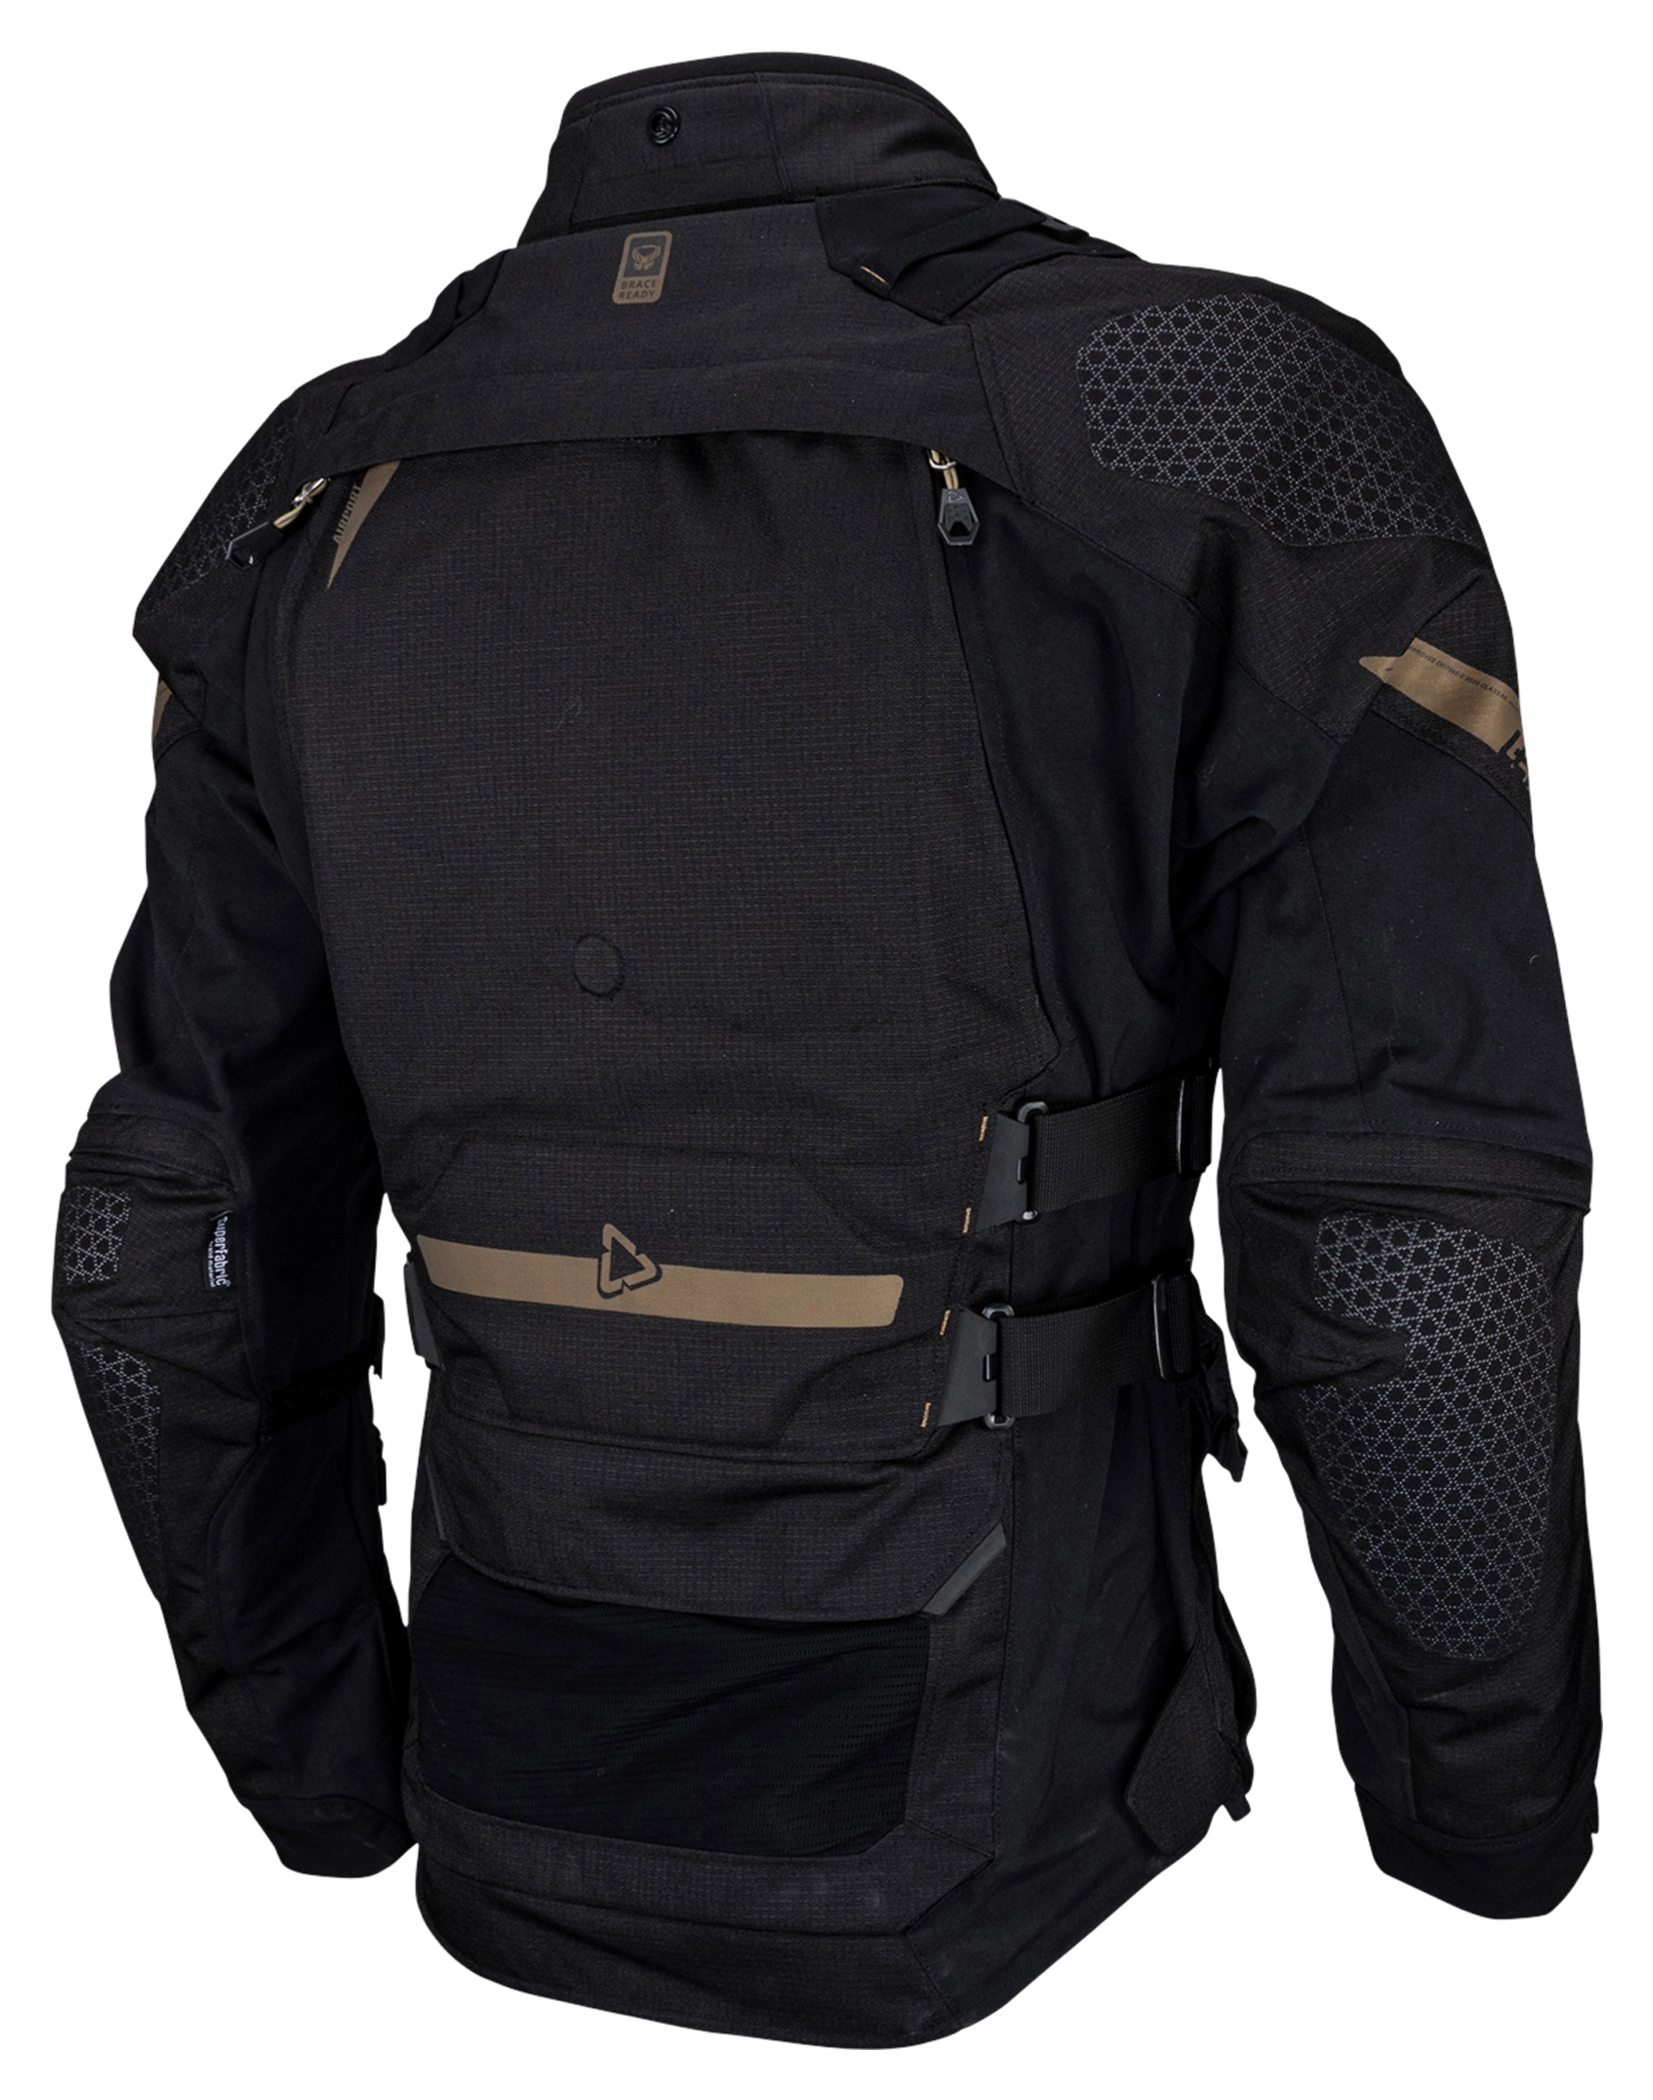 Spidi THERMO LINER JACKET, (black, accessory, size L) - Motorcycle Jacket